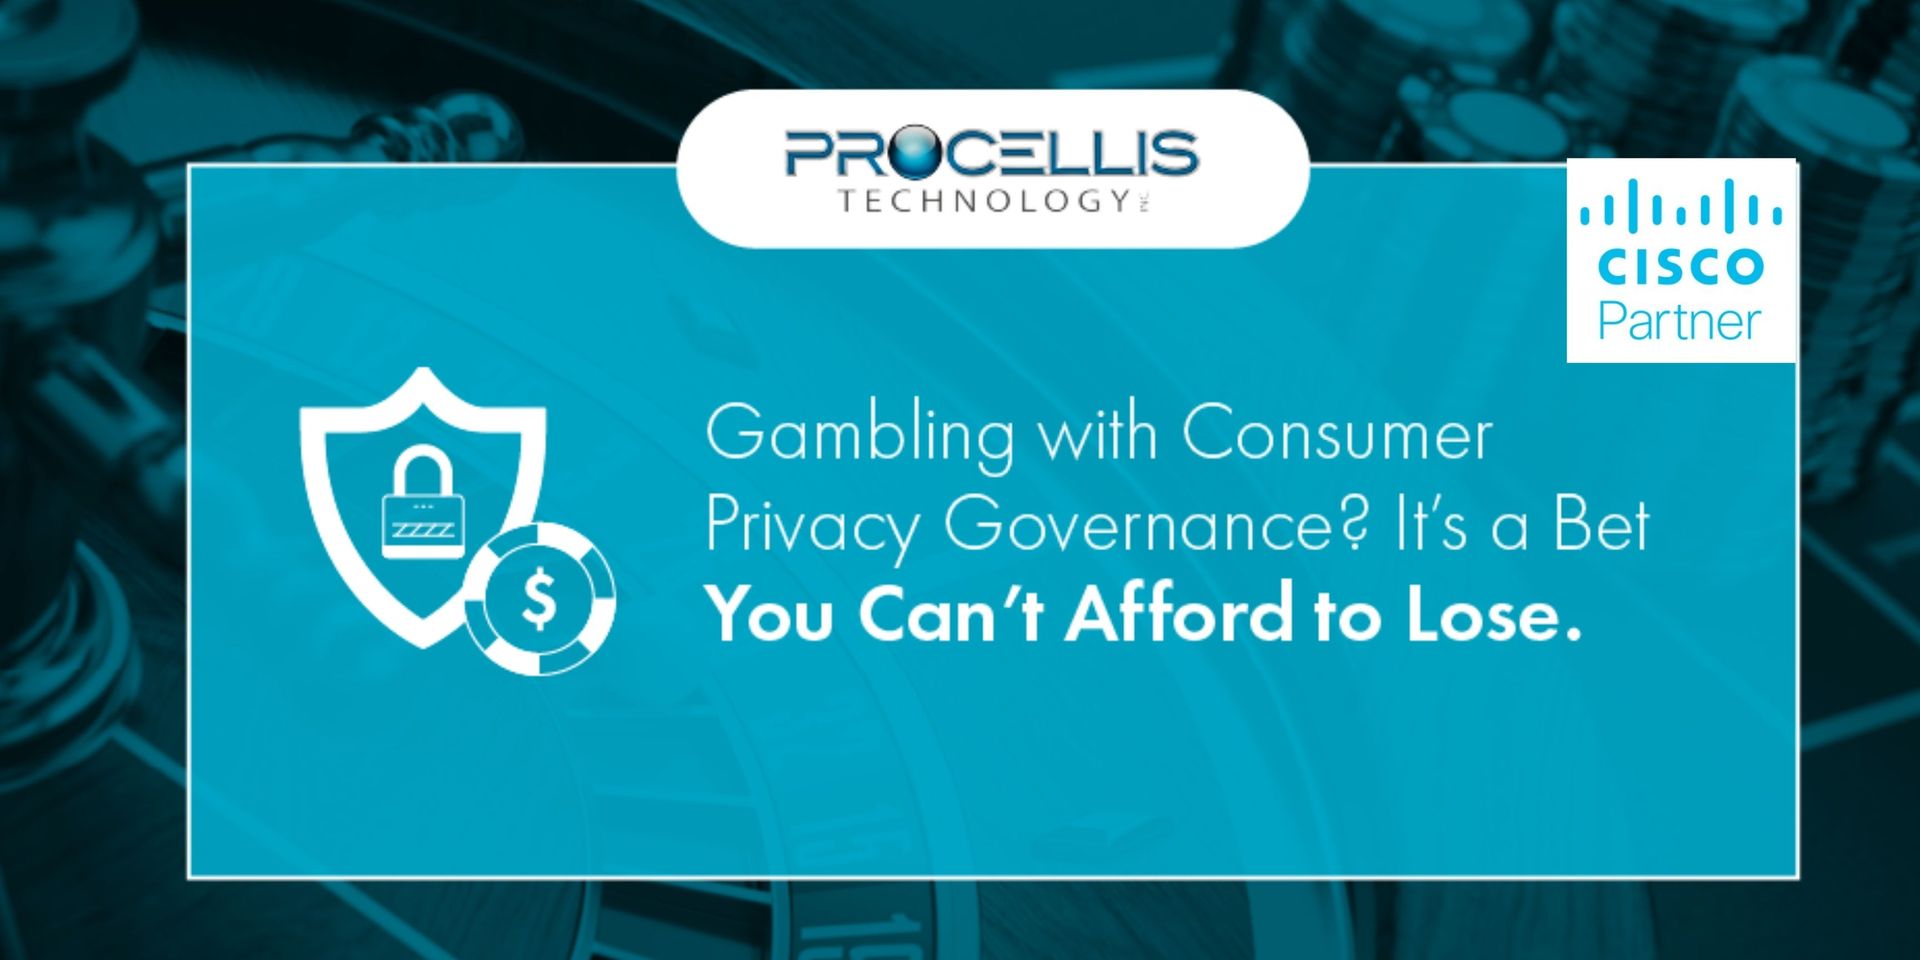 Gambling with Consumer Privacy Governance?